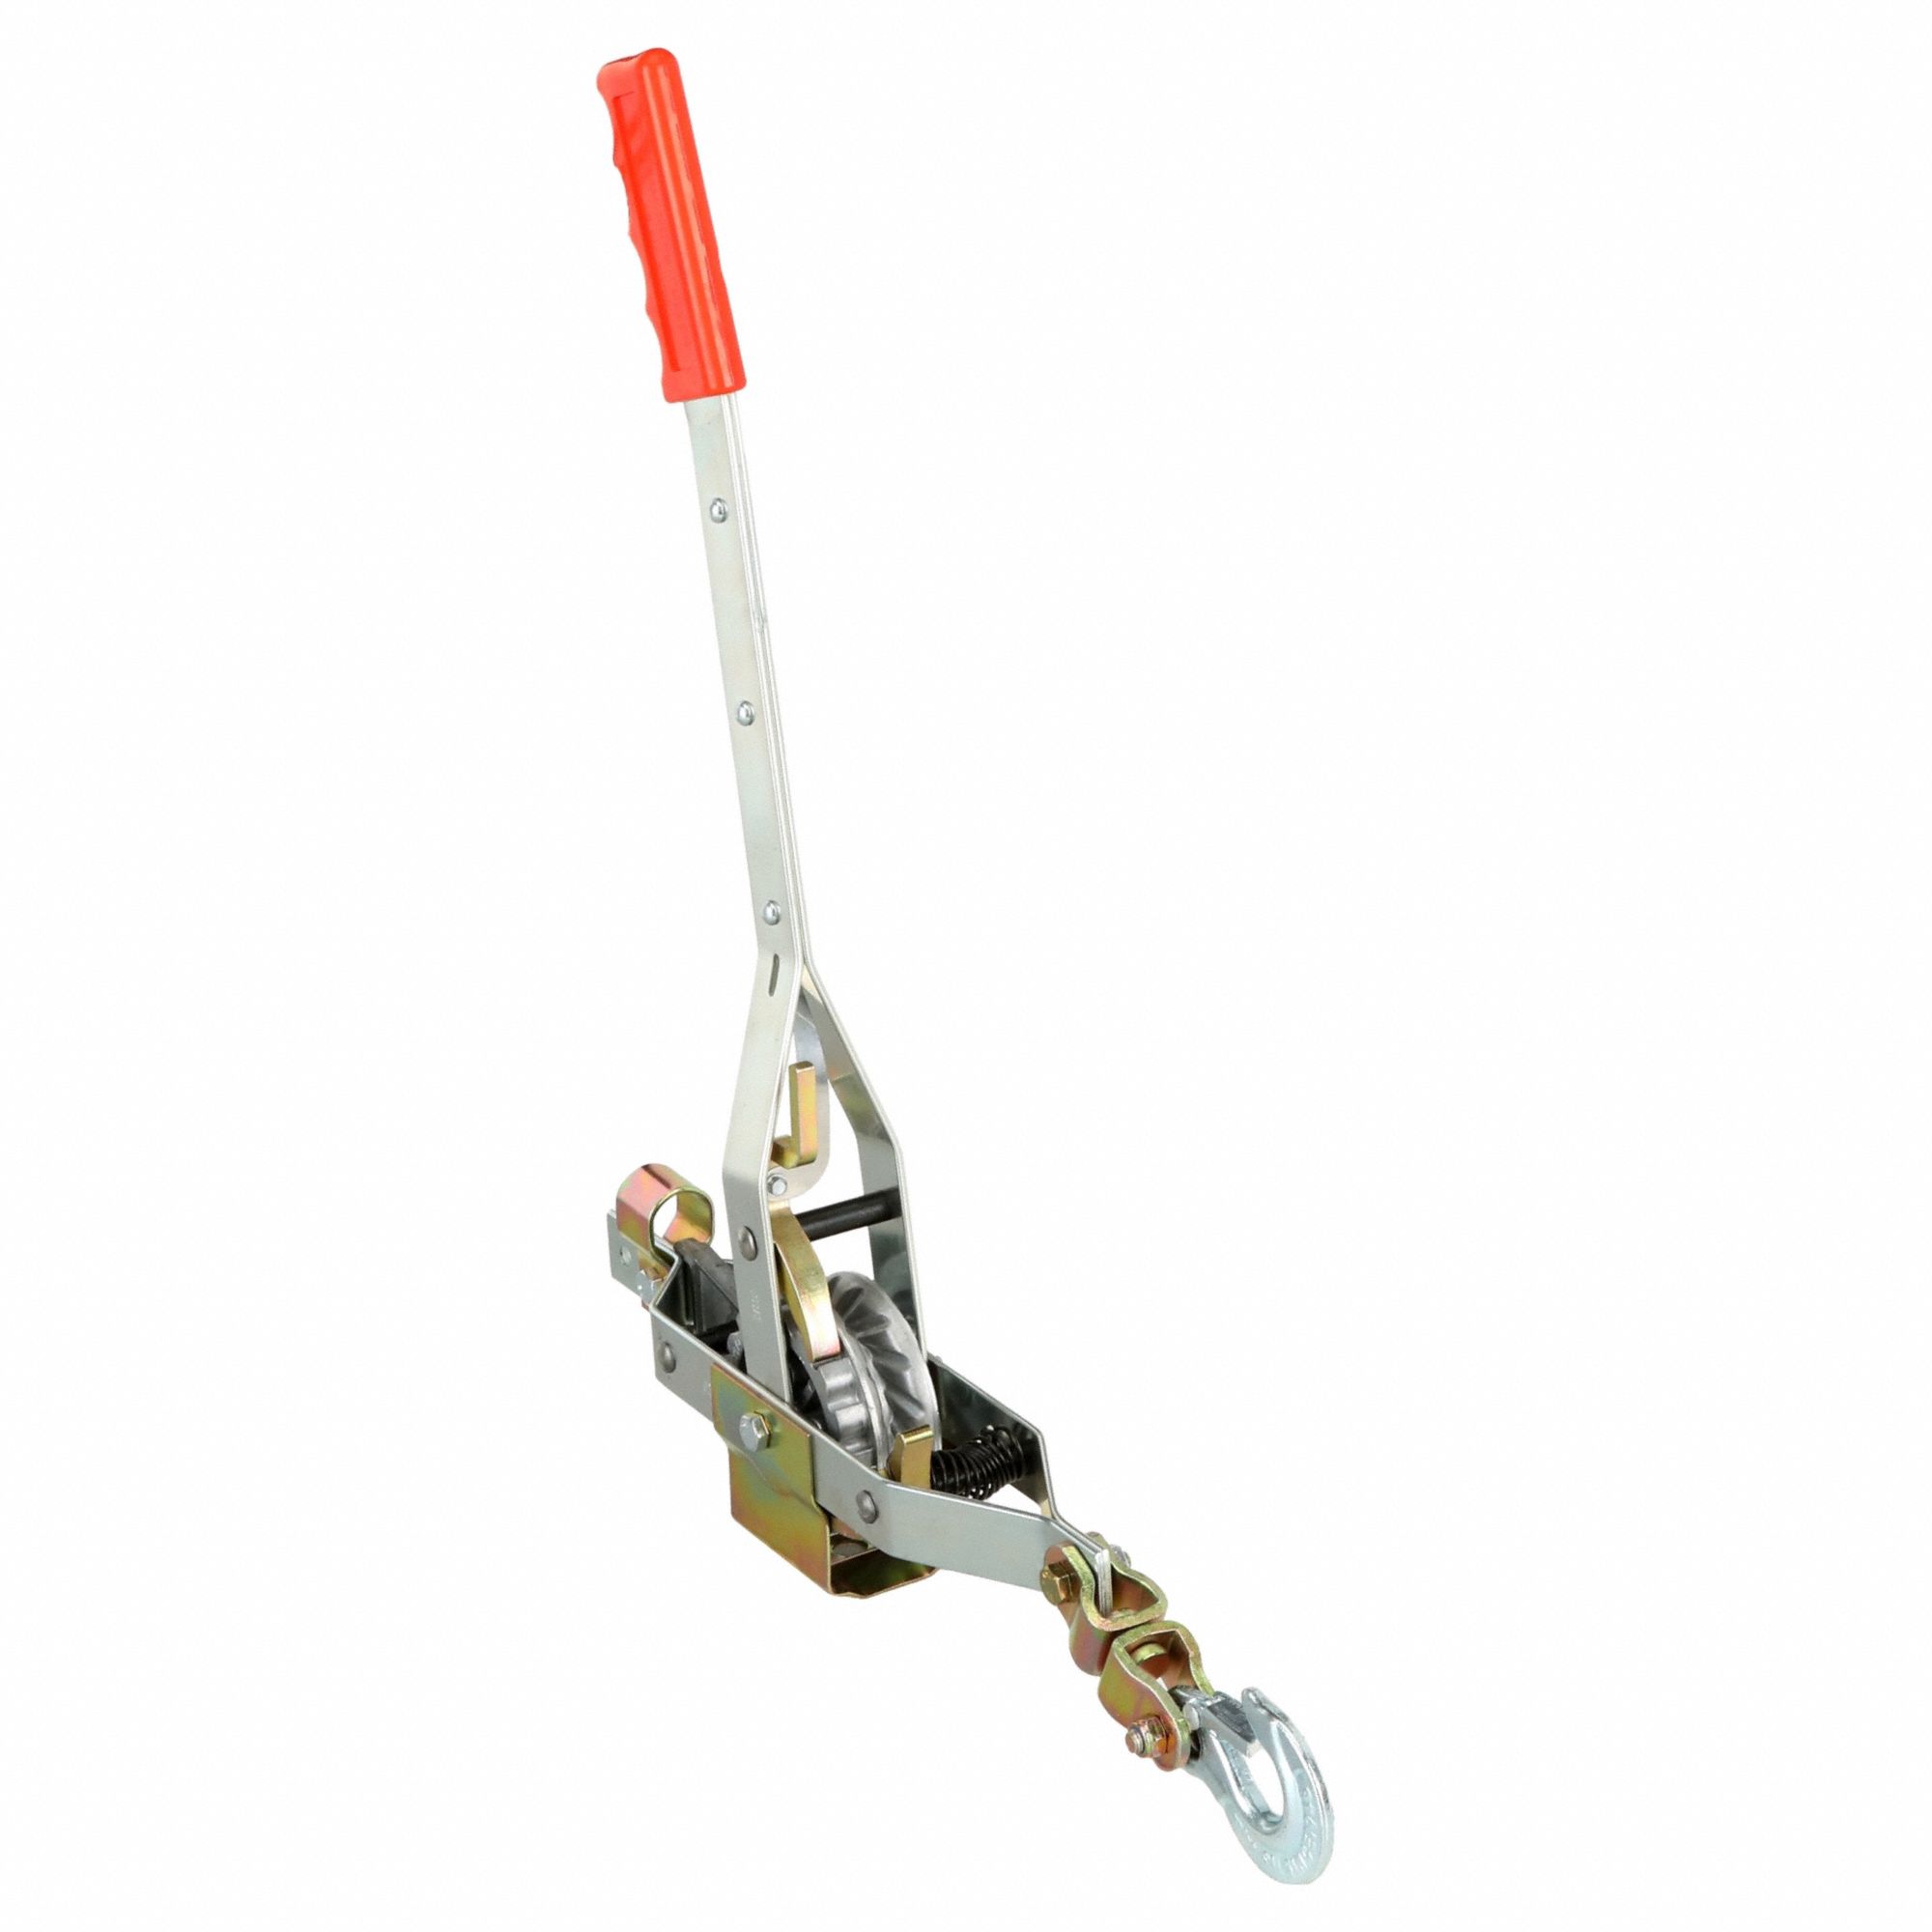 MAASDAM ROPE RATCHET PULLER,20 FT.,19 HANDLE L - Cable Hoists and